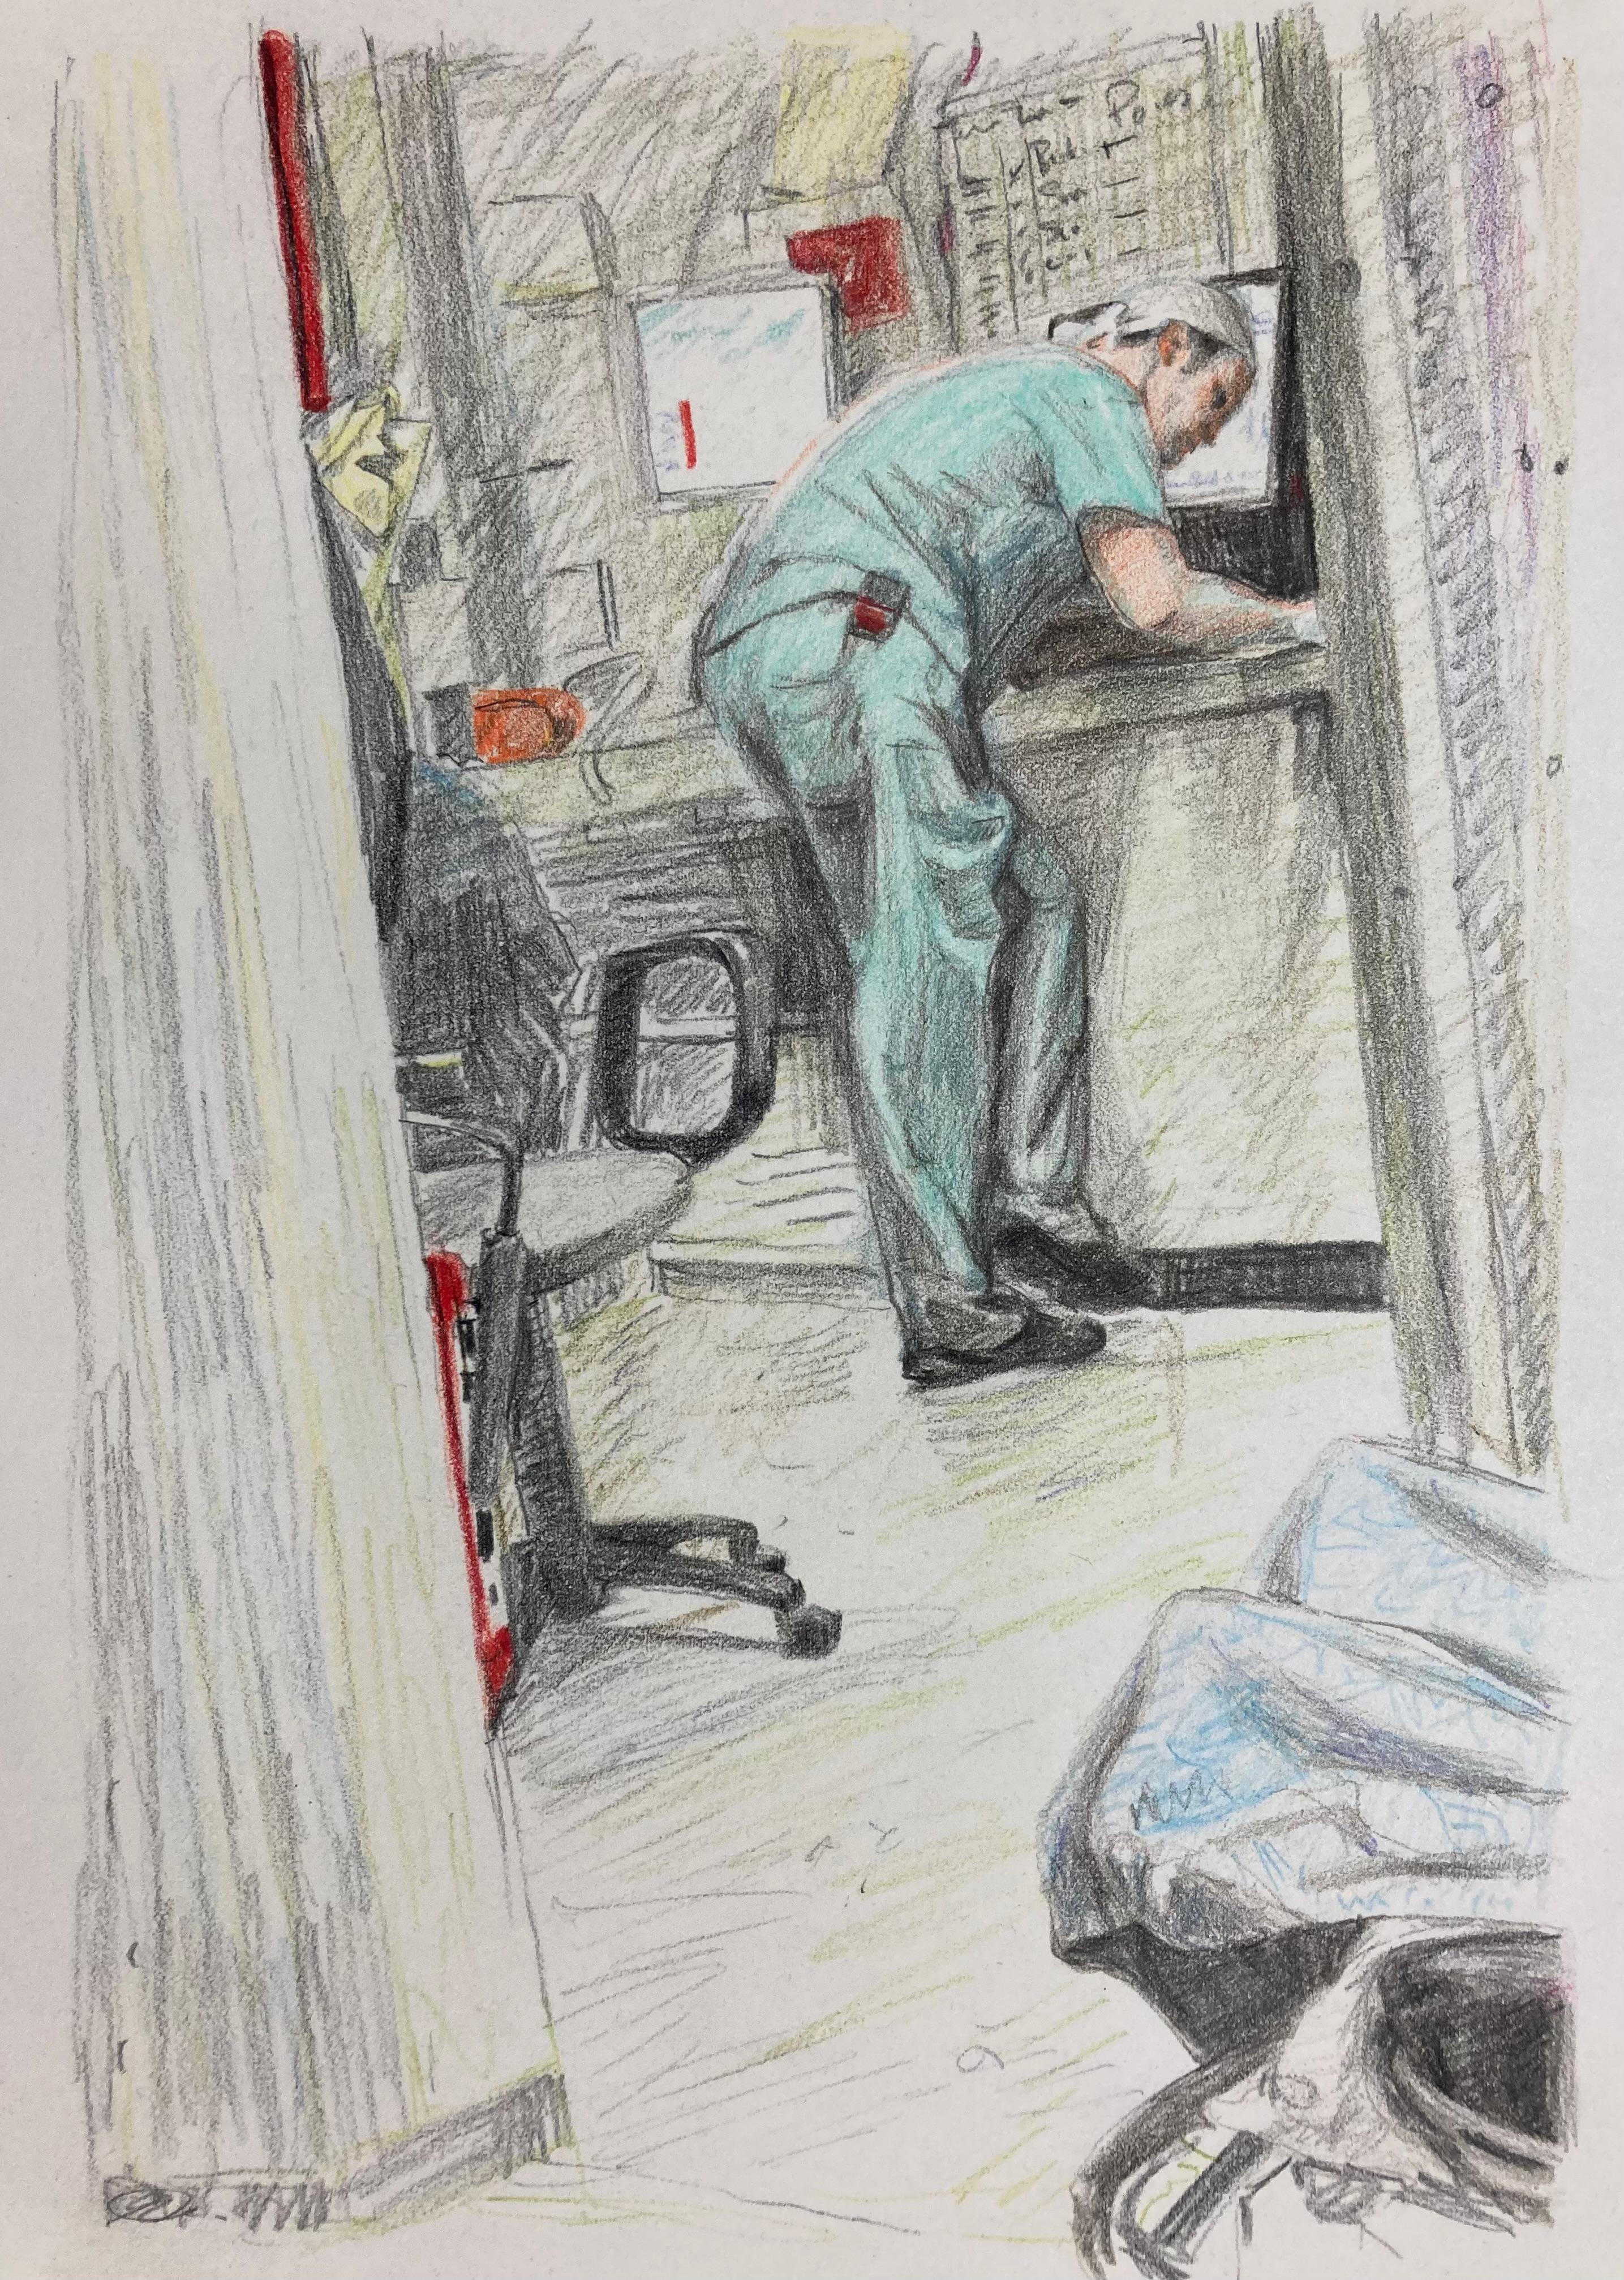 Eilis Crean Interior Art - "Hospital Worker #3" - interior drawing - colorful work on paper - Daumier